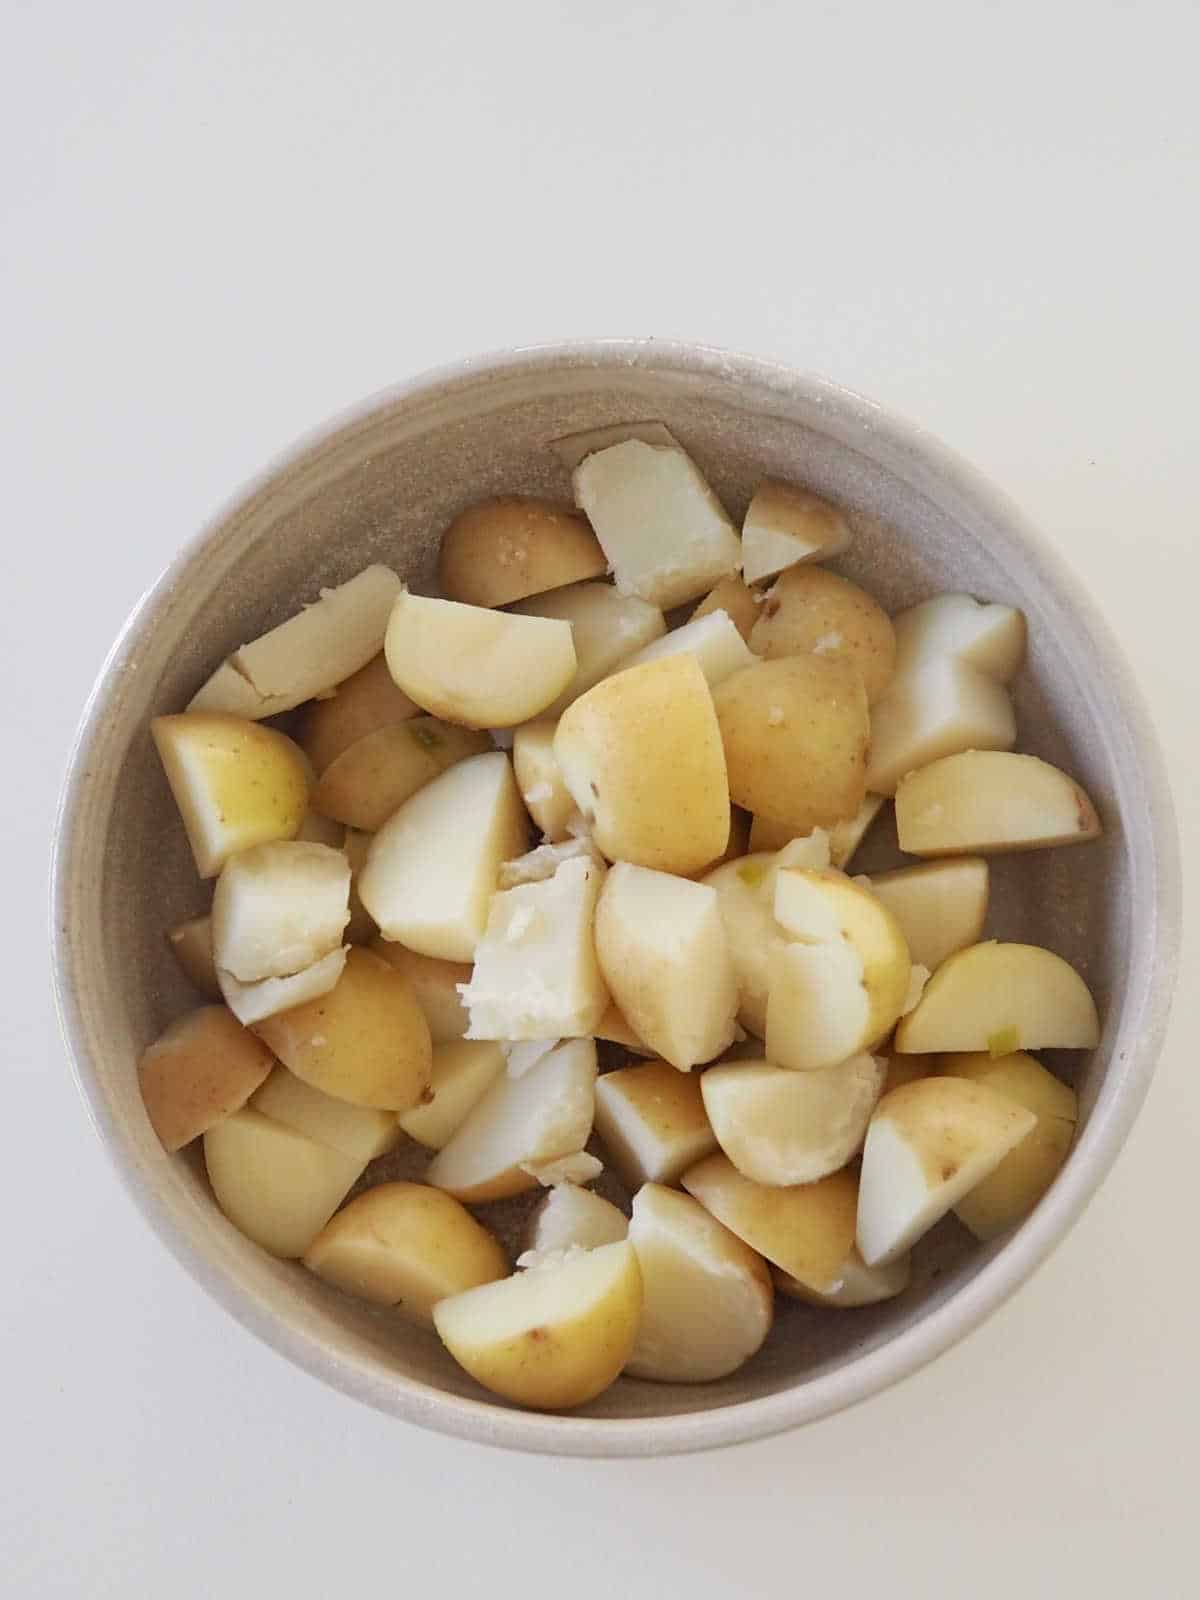 Cooked potatoes in bowl.